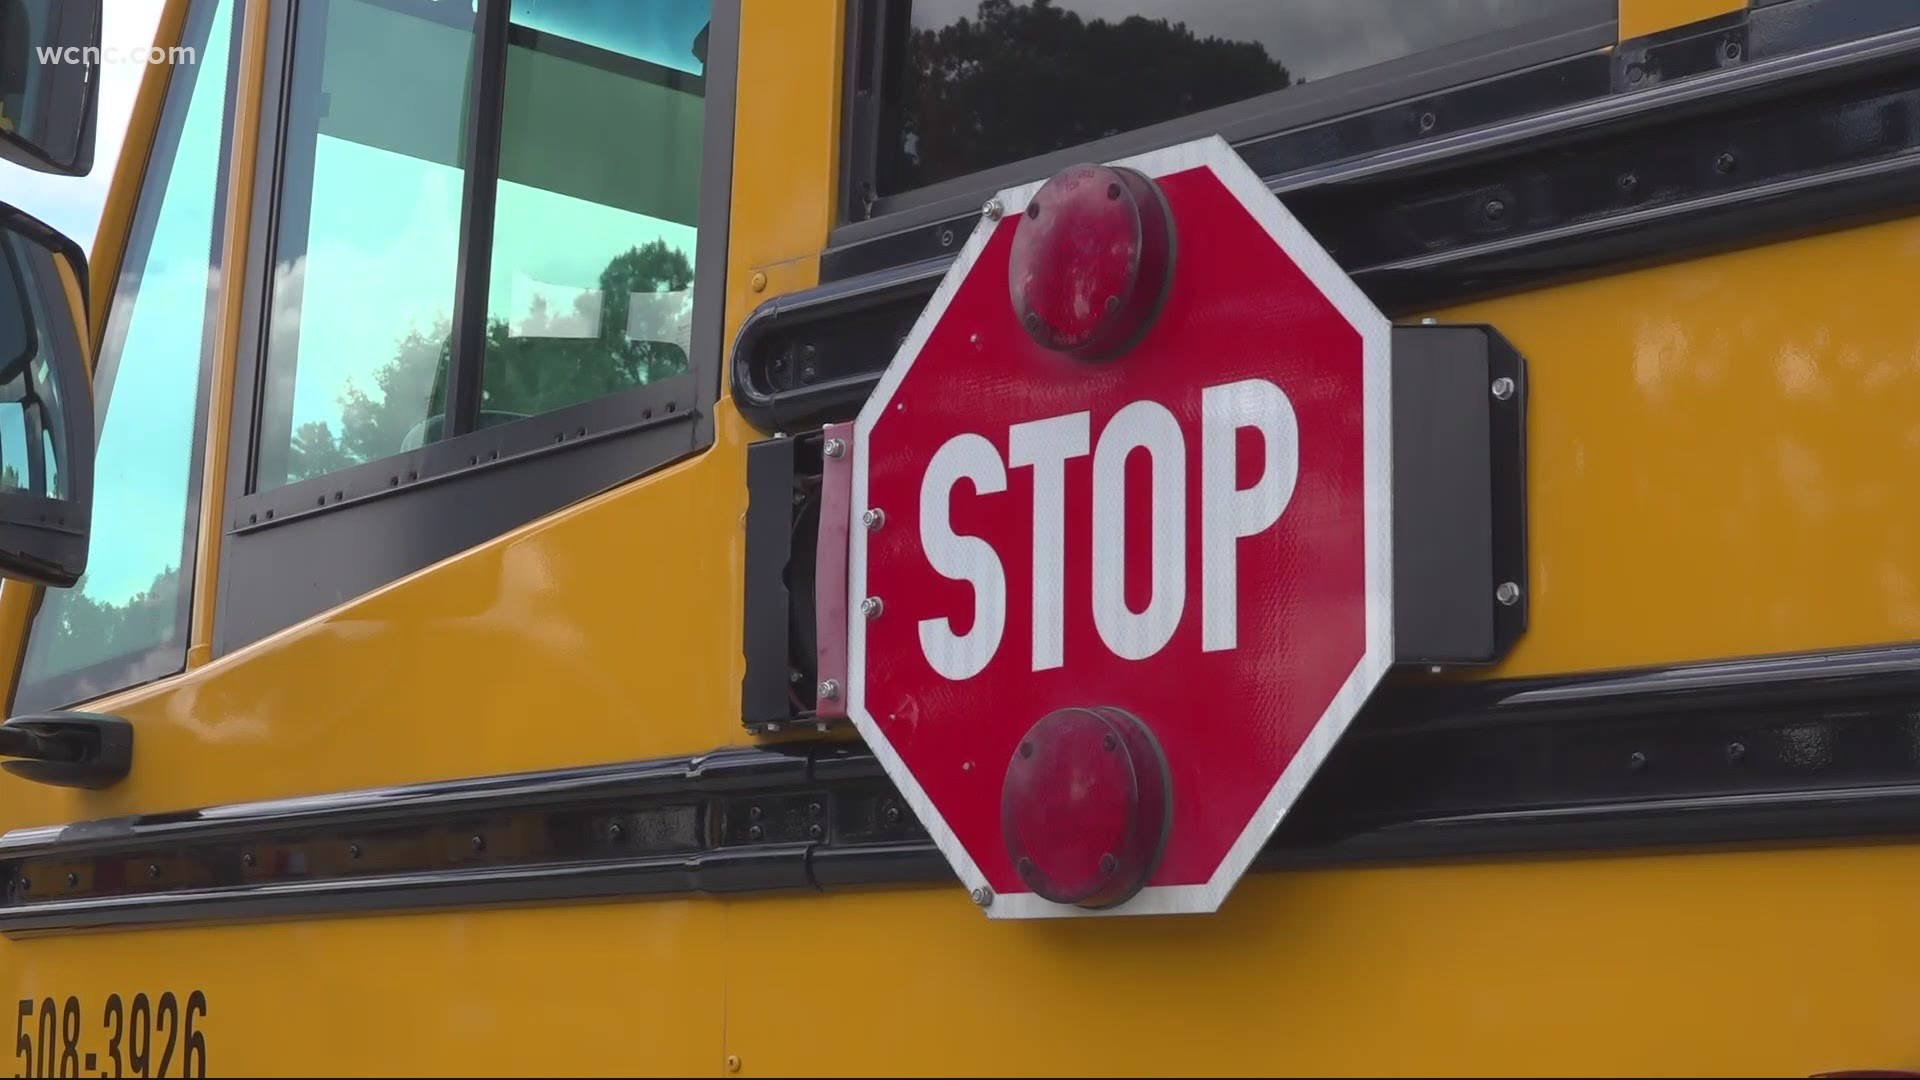 This fall, school buses will be able to operate at 100 percent capacity in South Carolina.